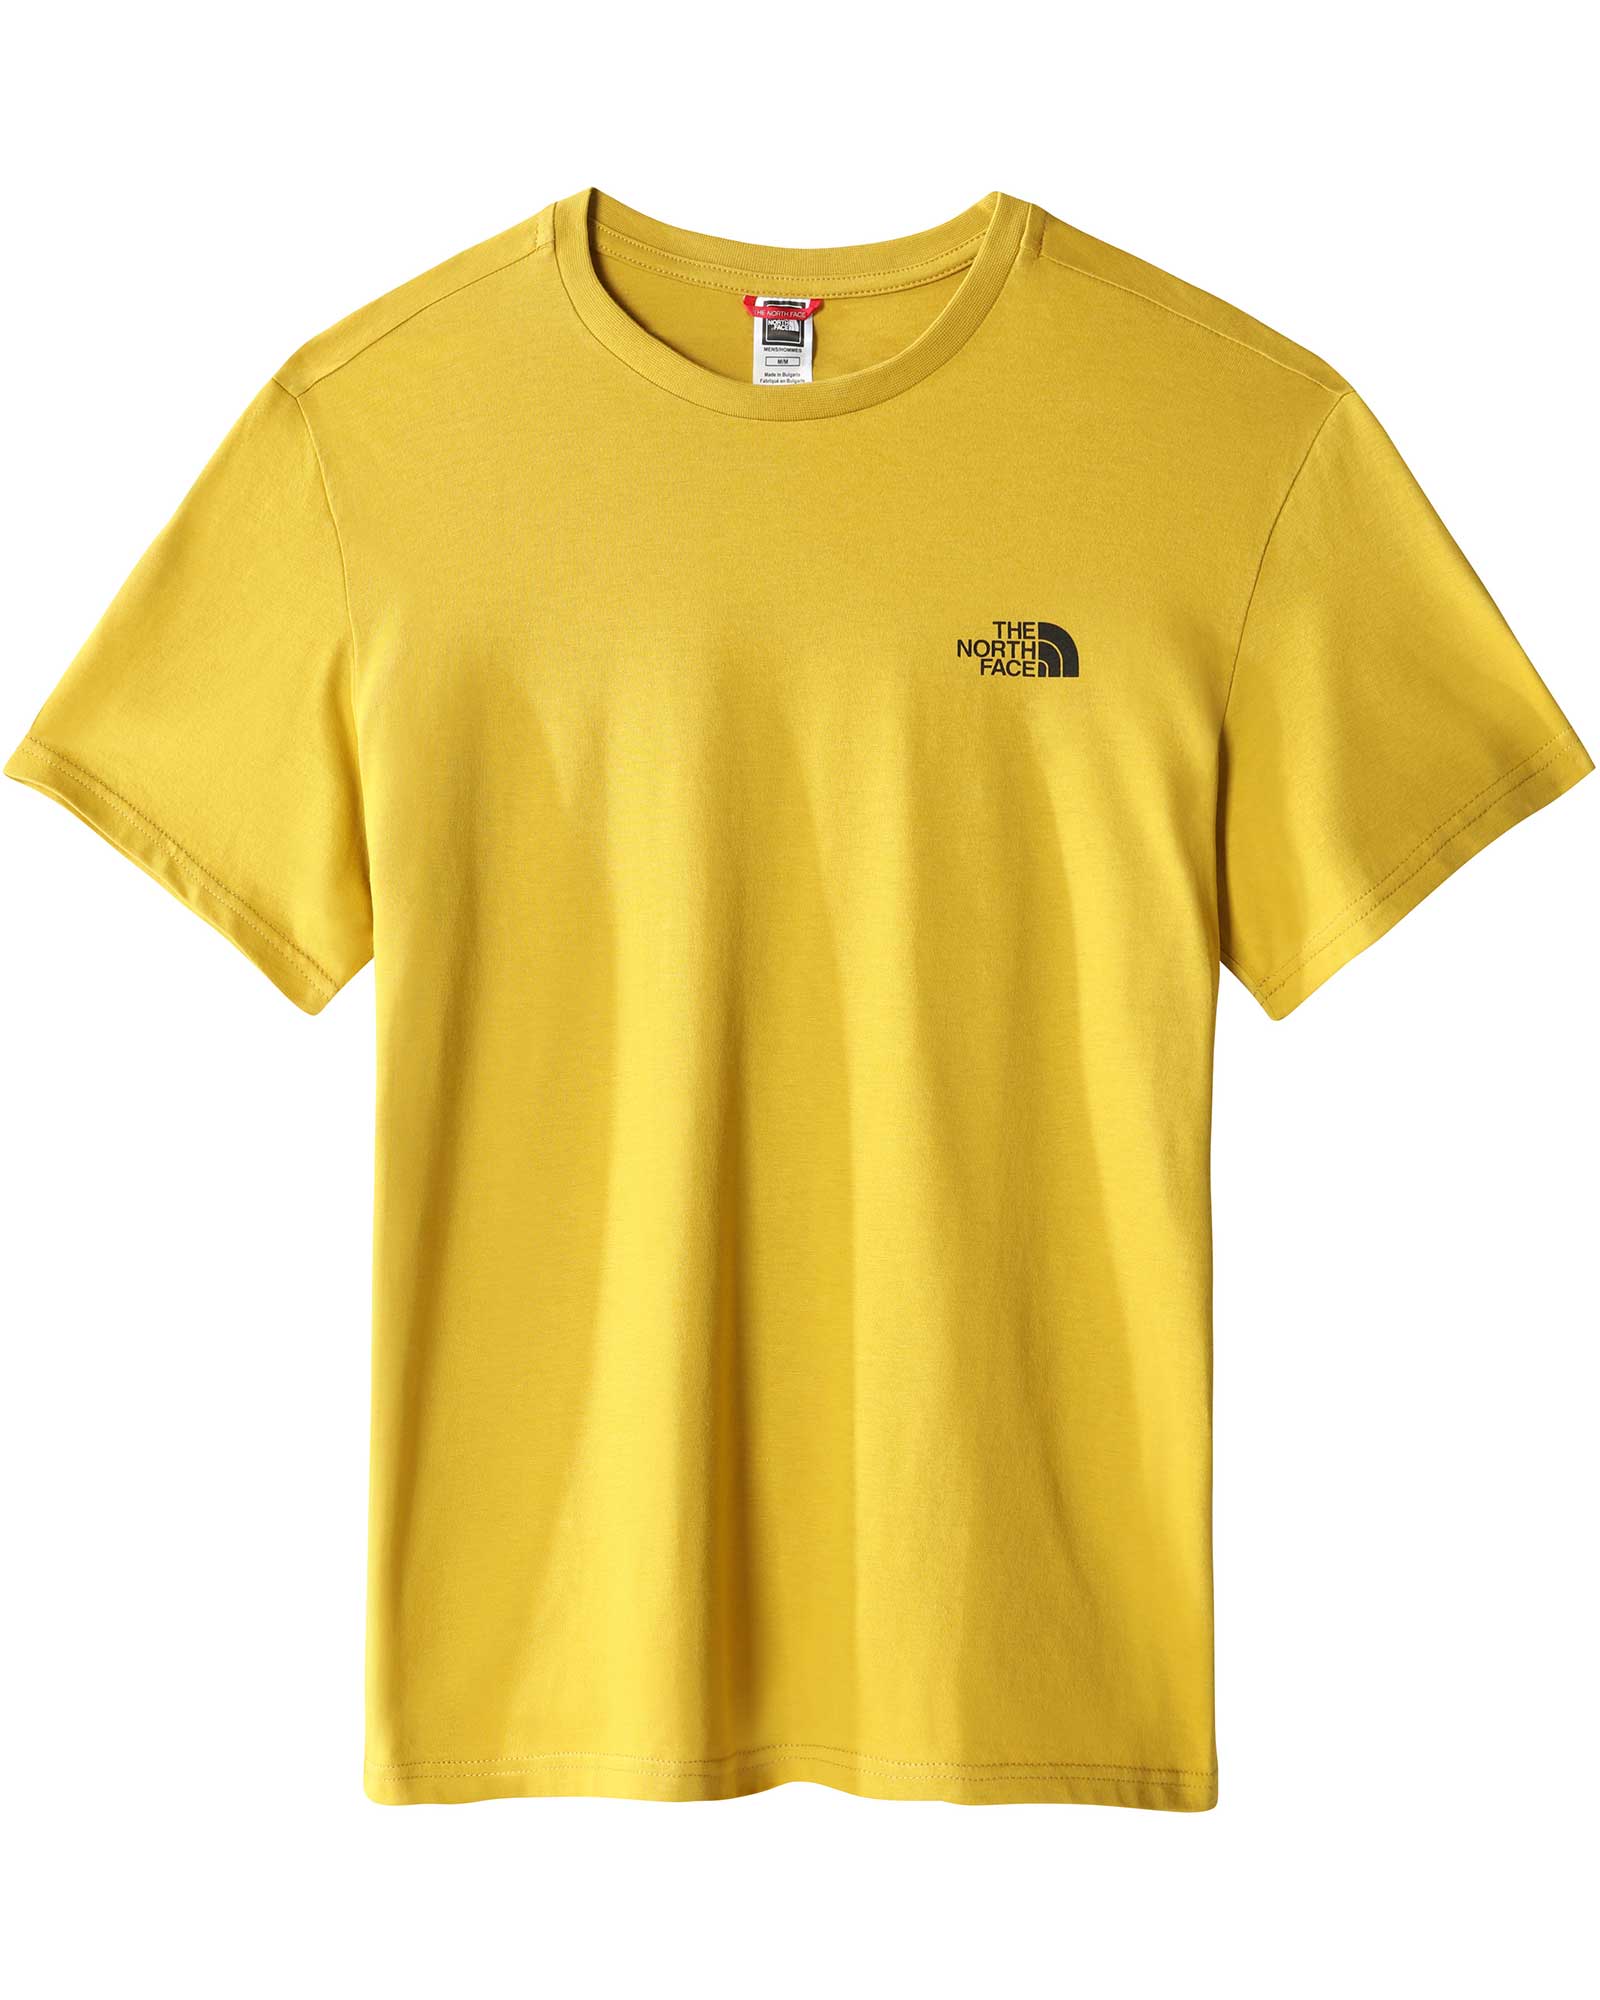 Product image of The North Face Simple Dome Men's T-Shirt